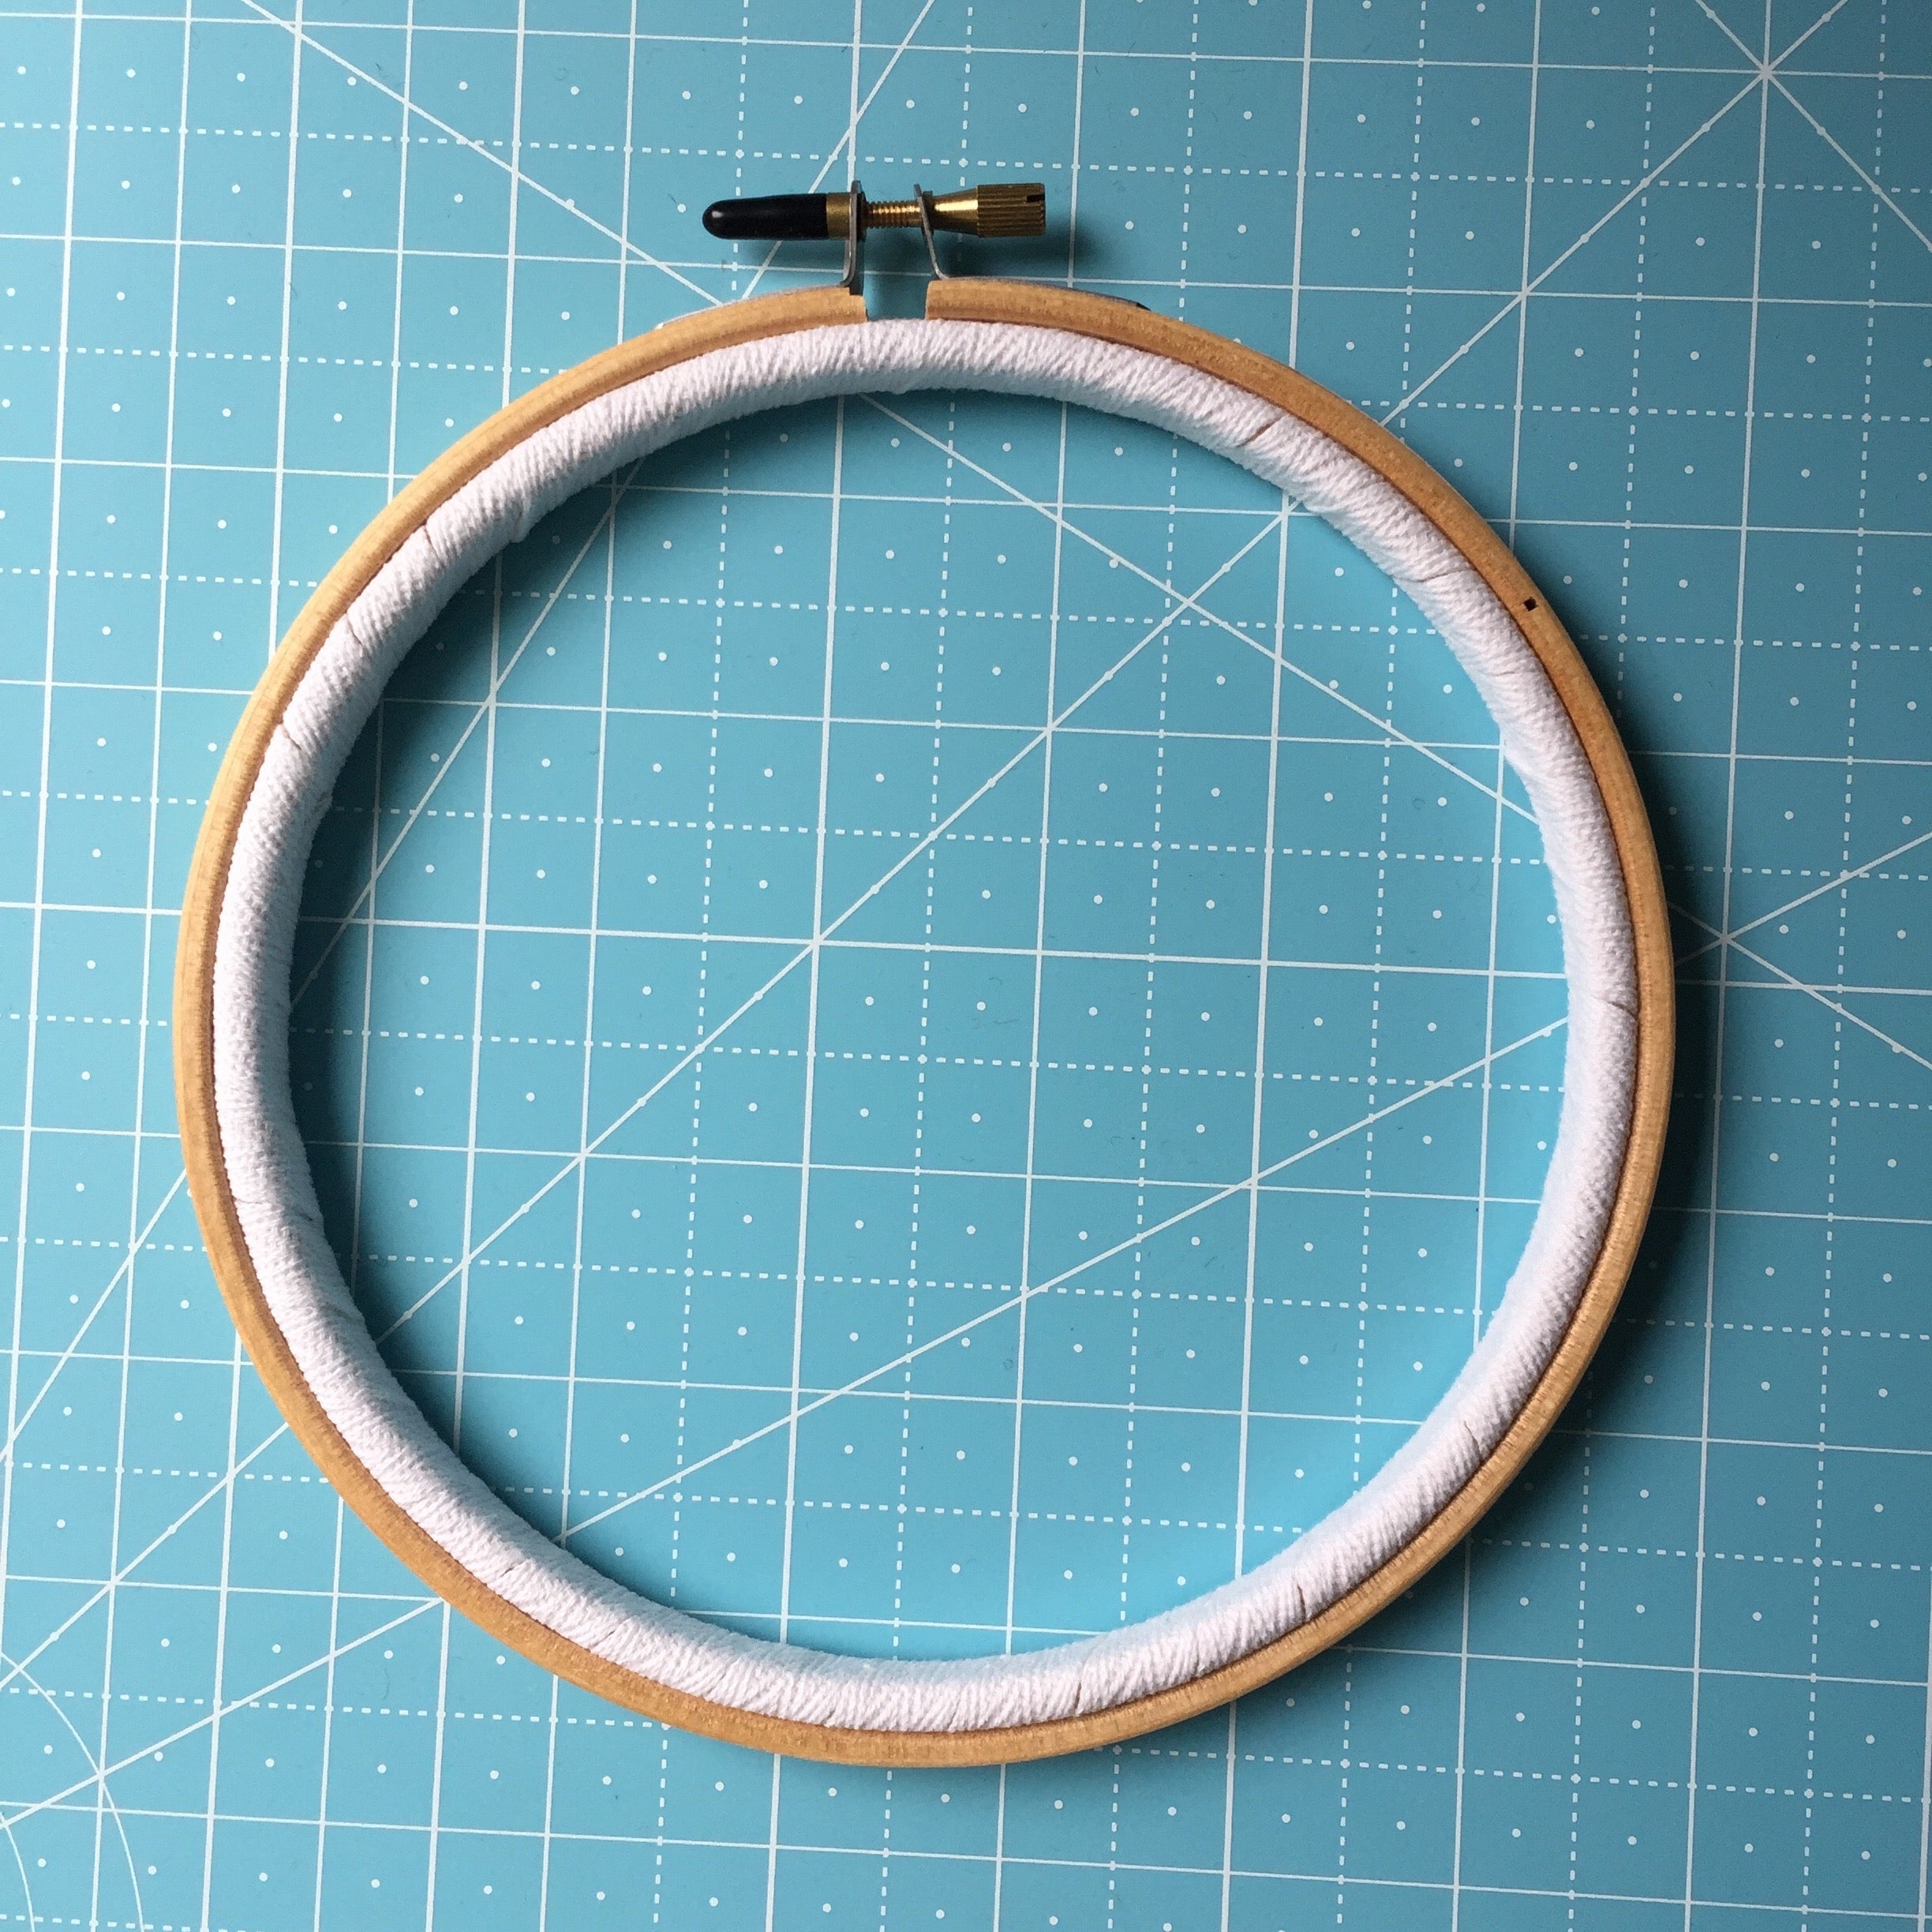 Improve Fabric Tension by Binding Your Embroidery Hoop